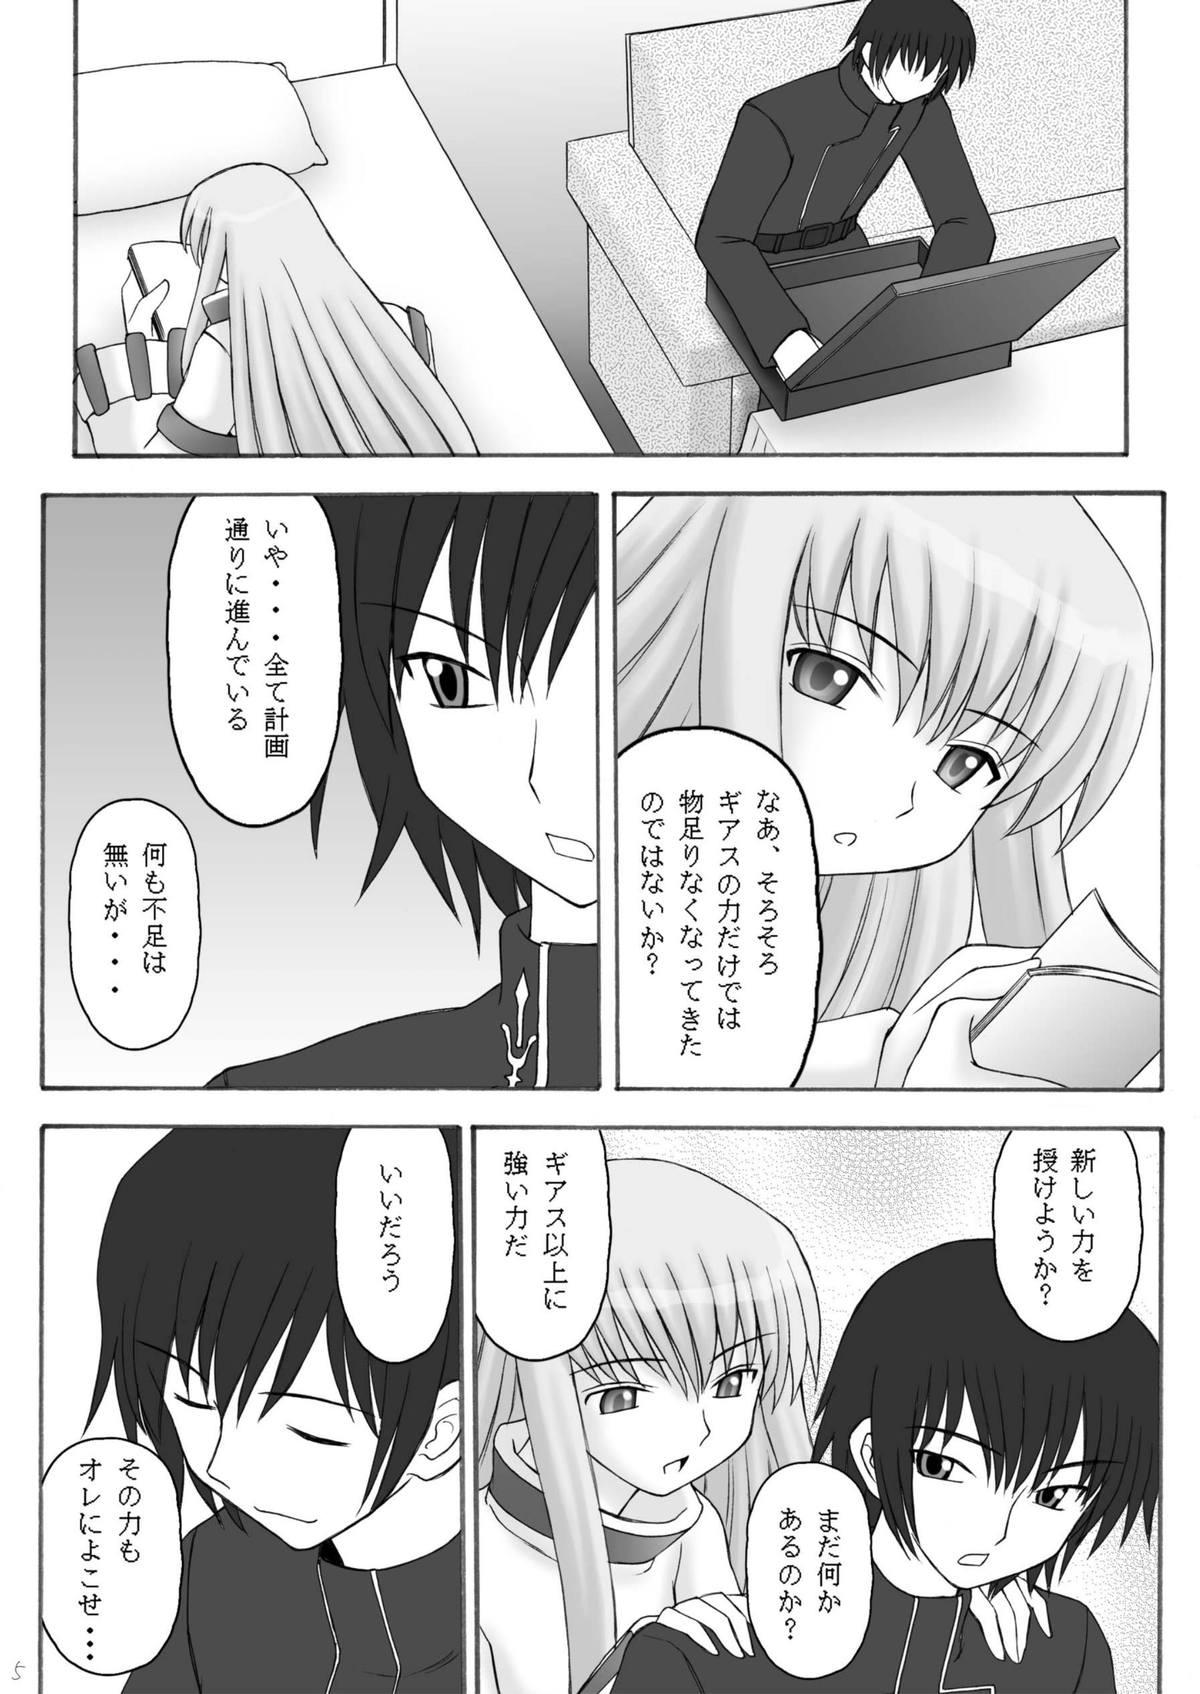 Ano C×2 - Code geass Trannies - Page 5